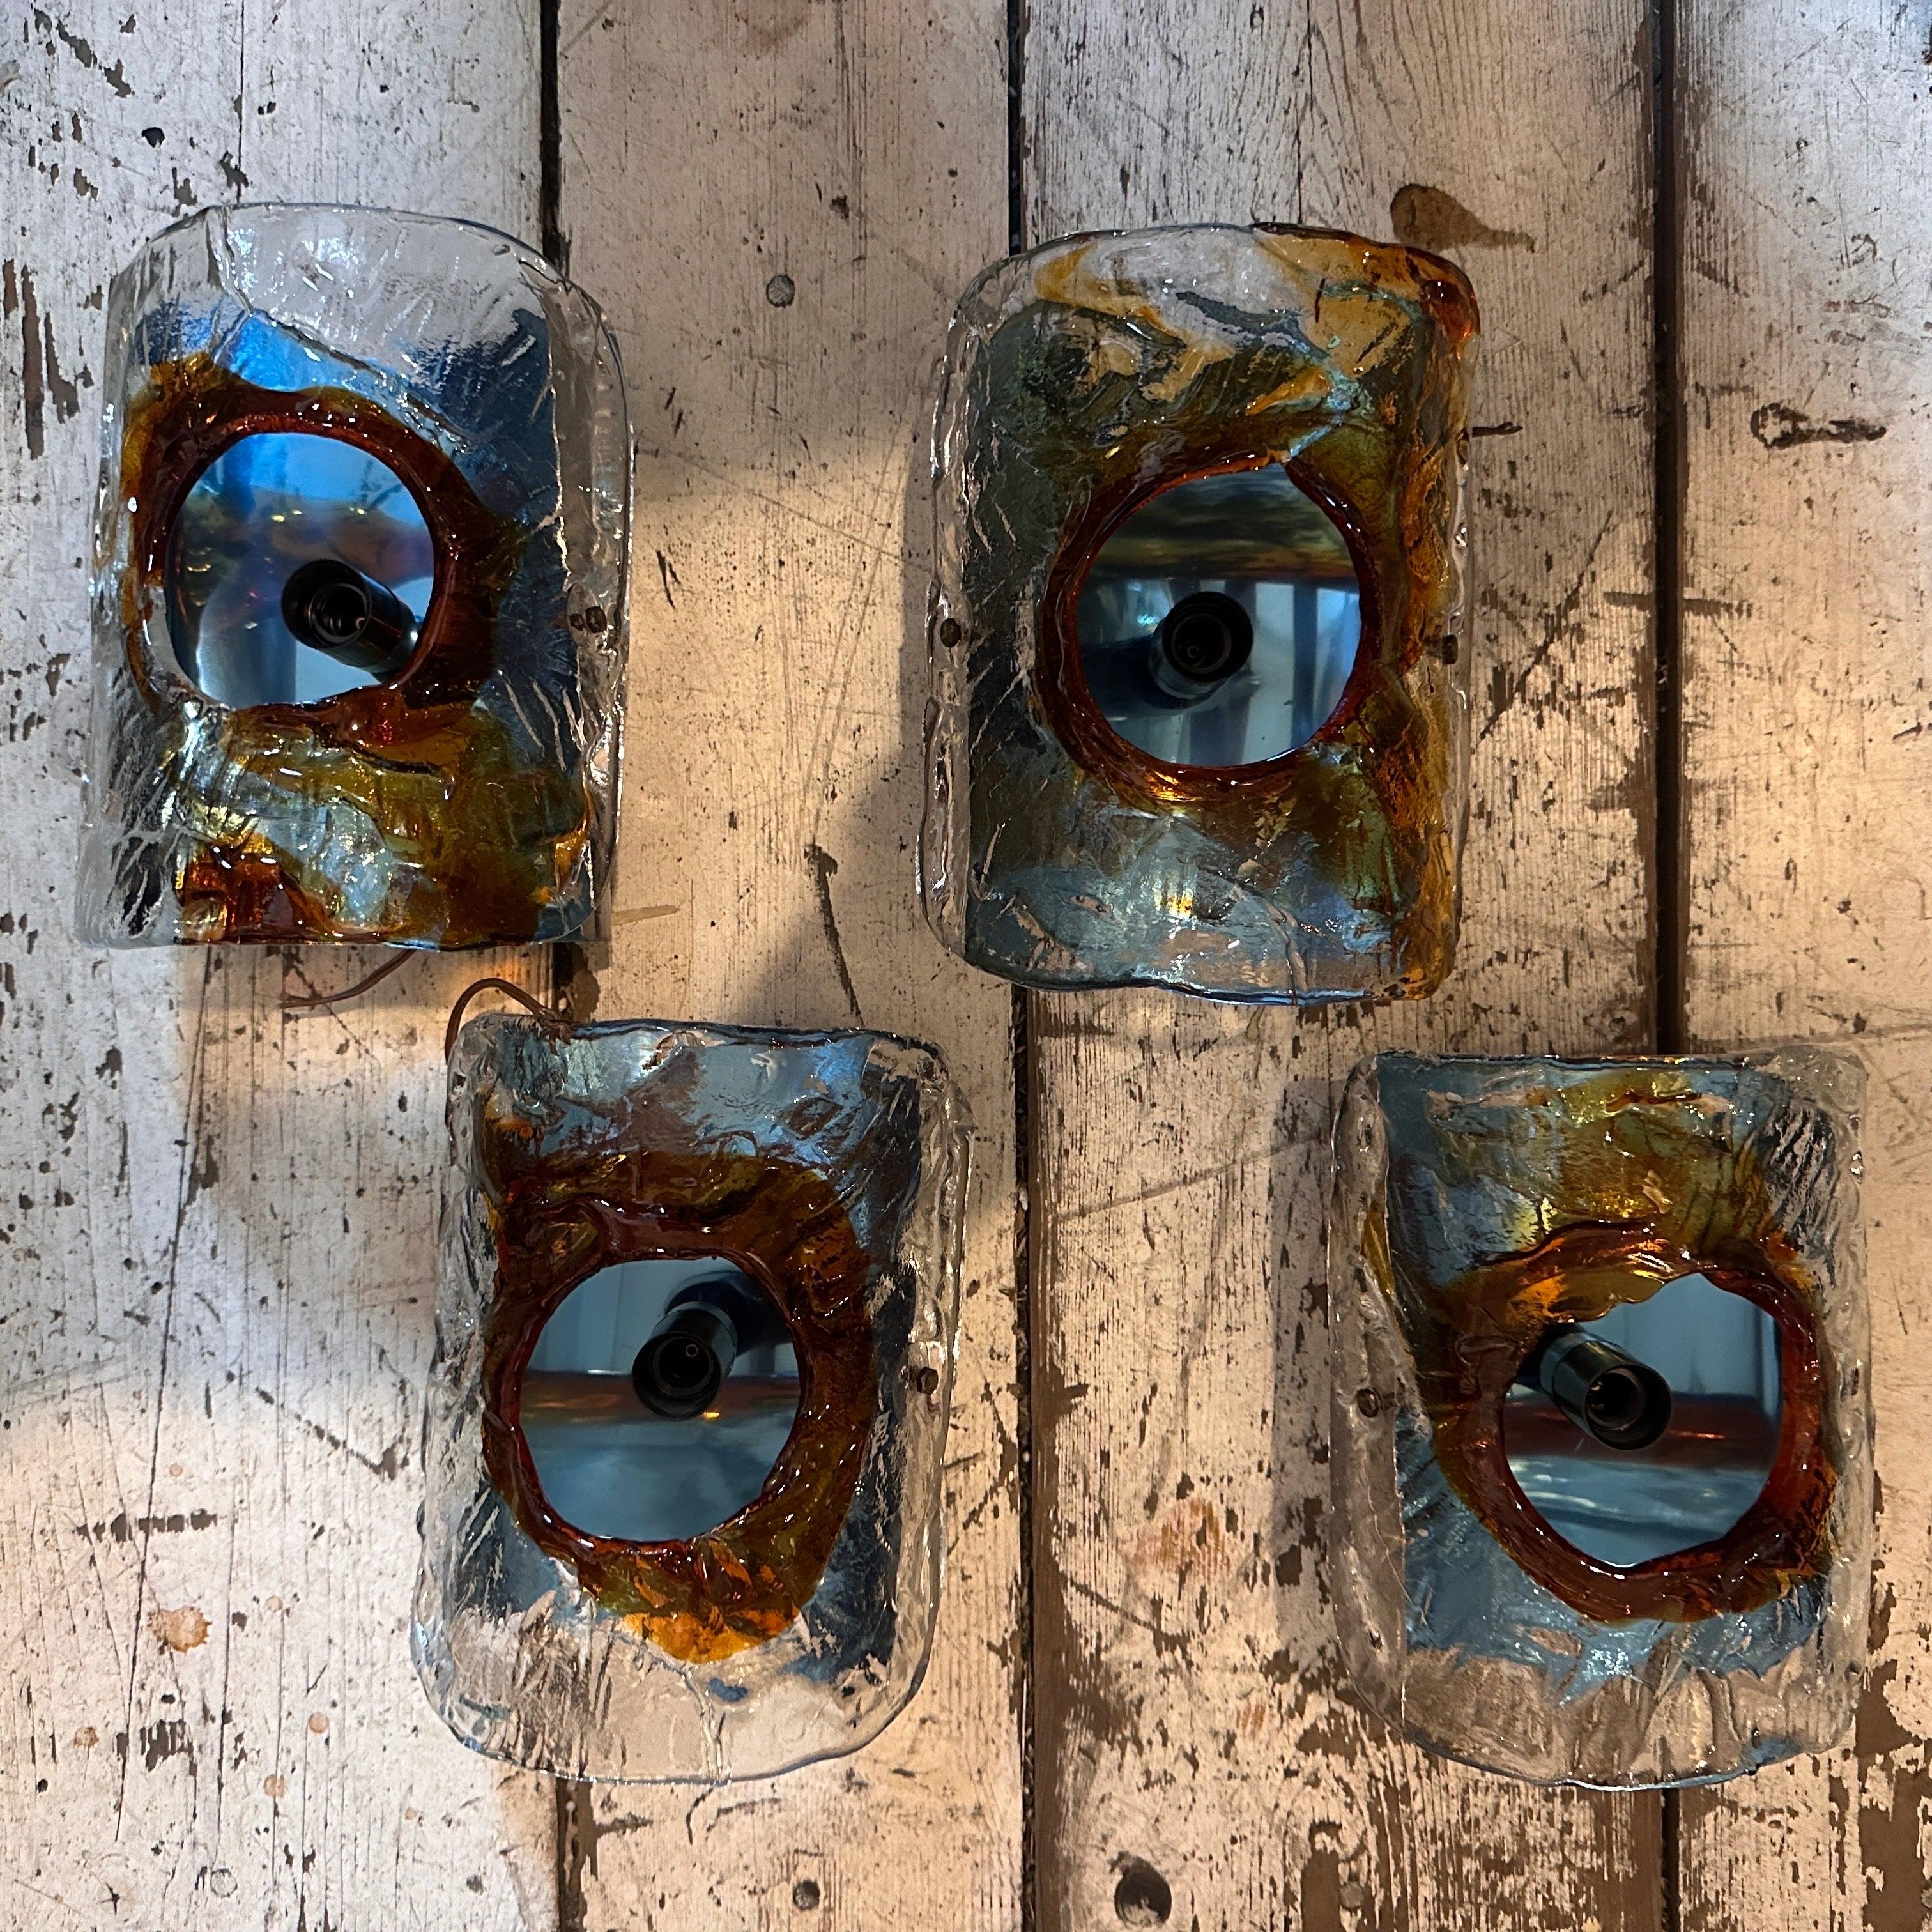 Four orange and brown murano glass and steel wall sconces designed and manufactured with love in the Space Age Era by Mazzega, they have been checked by an electrician and are in perfect working order. the sconces exemplify the dynamic and